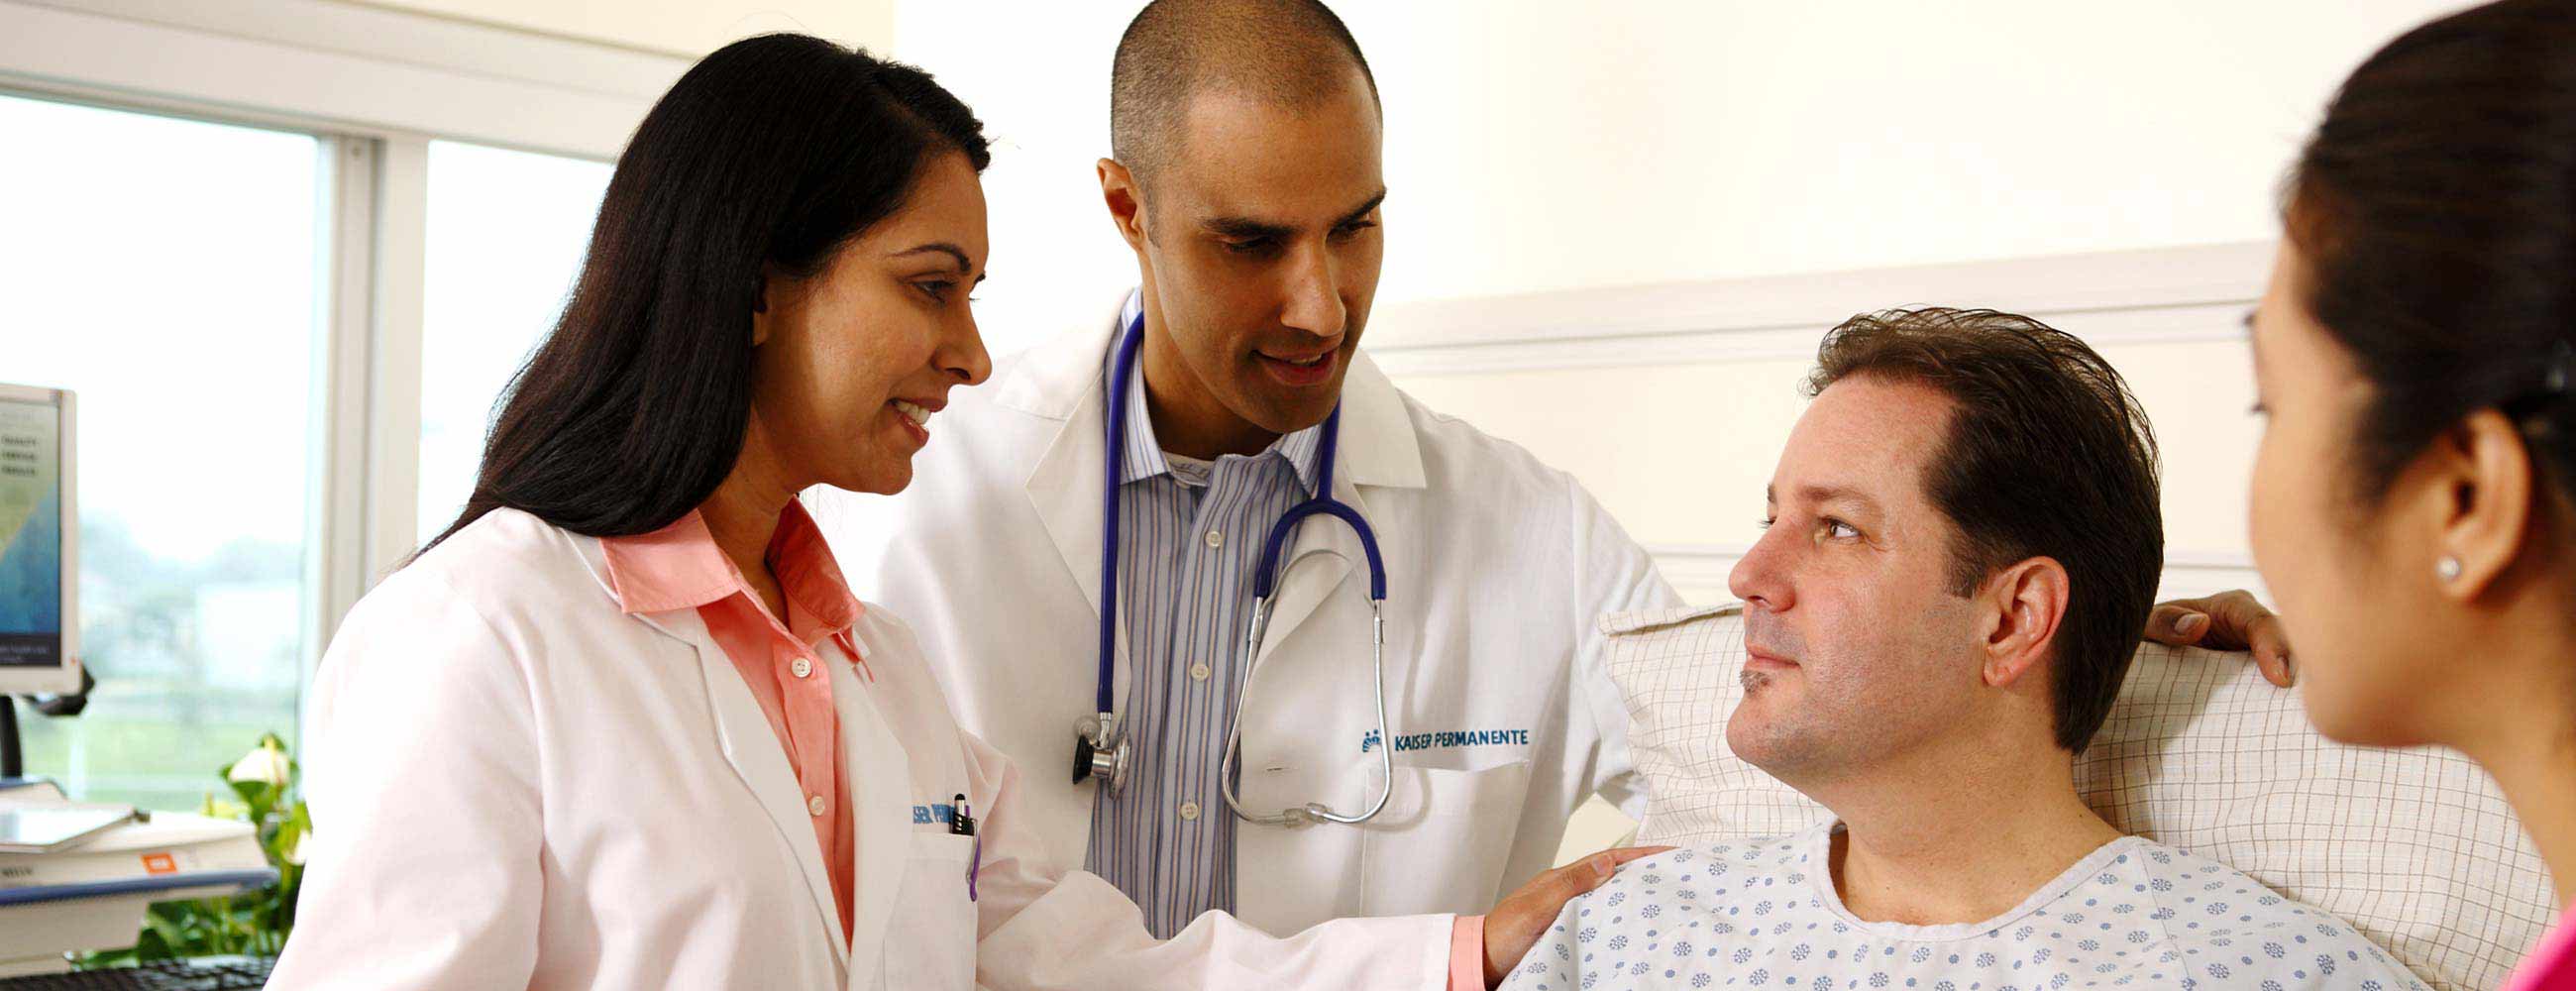 What is the role of physicians at Kaiser Permanente?
